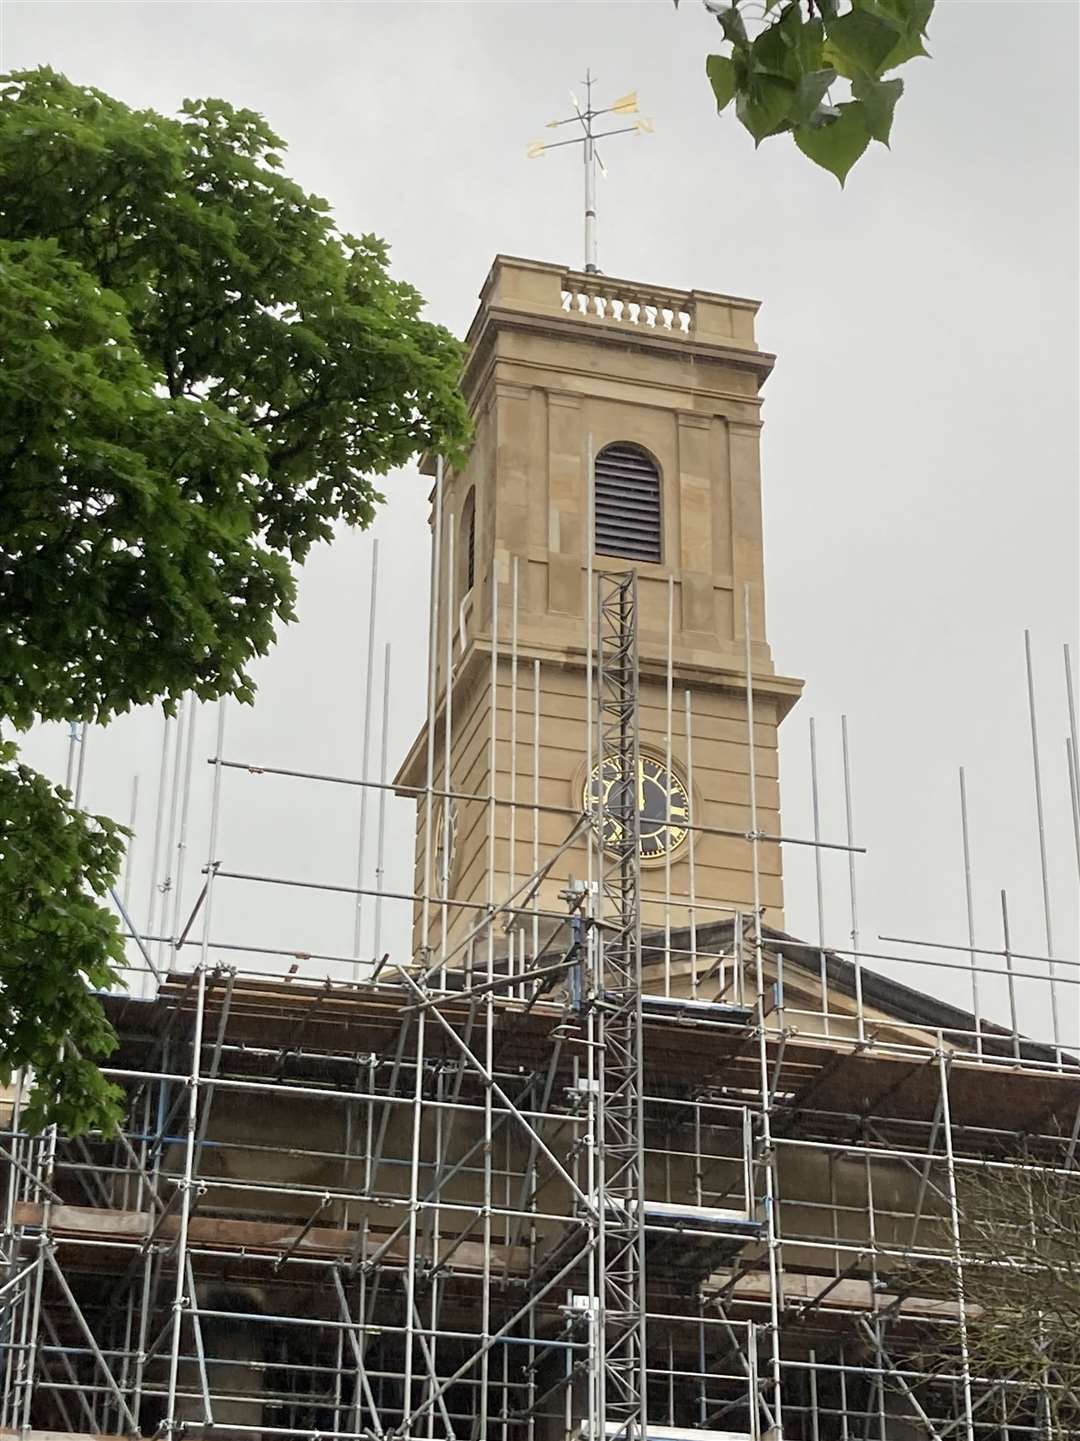 Dockyard Church, Blue Town, is nearing the end of its restoration